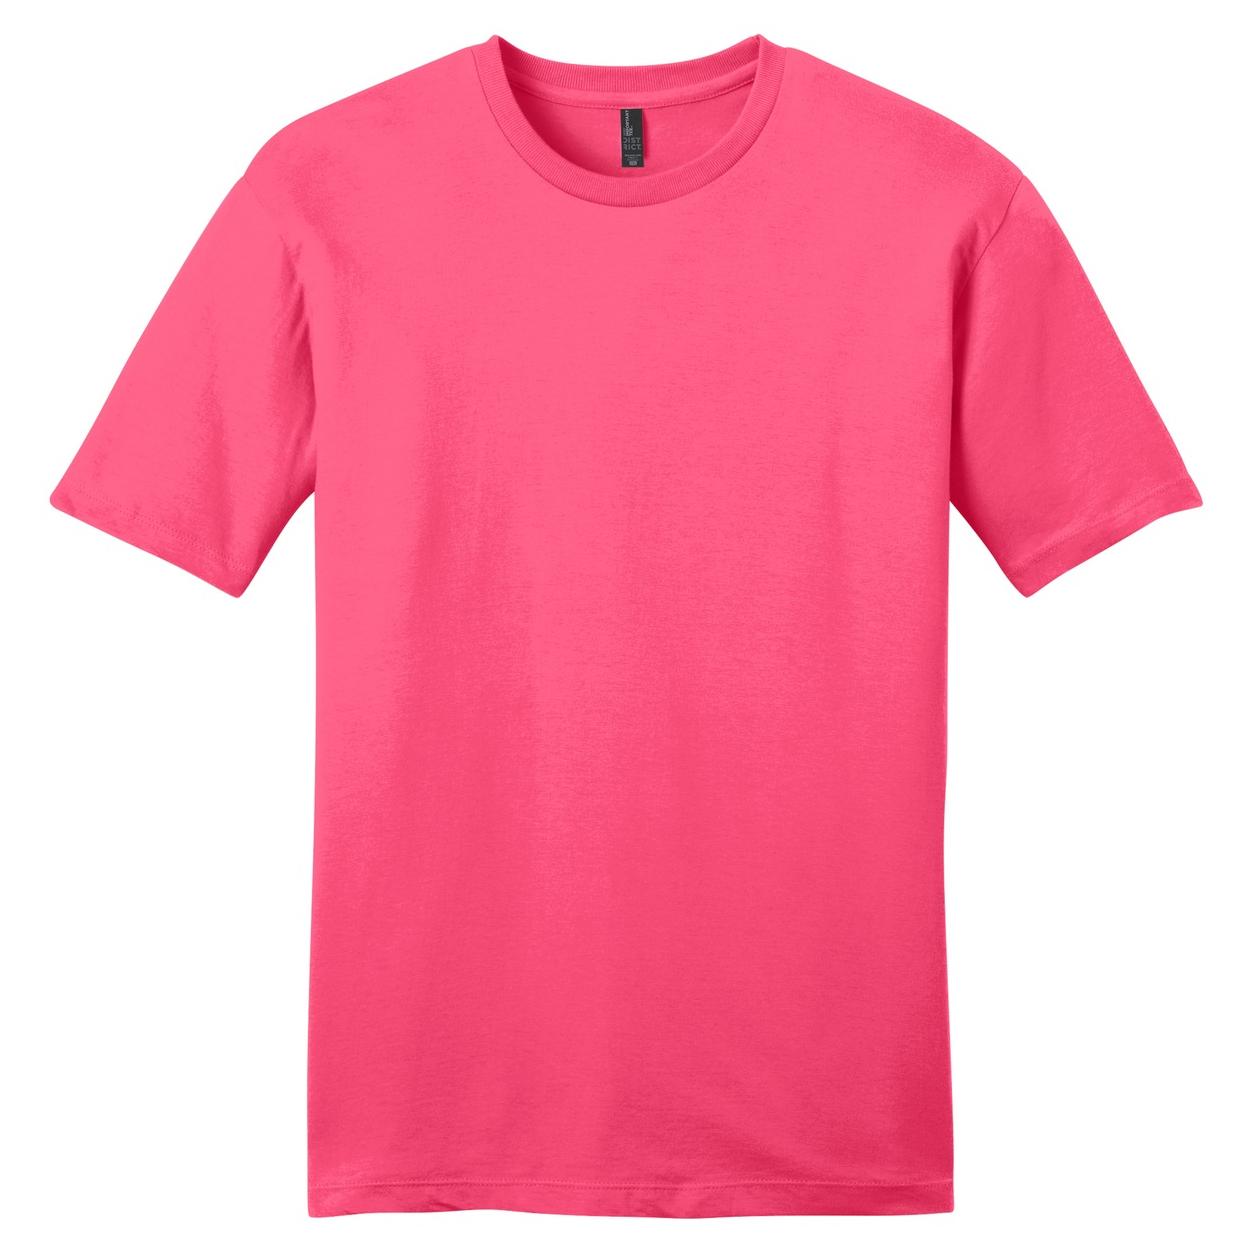 District DT6000 Very Important Tee - Neon Pink | FullSource.com